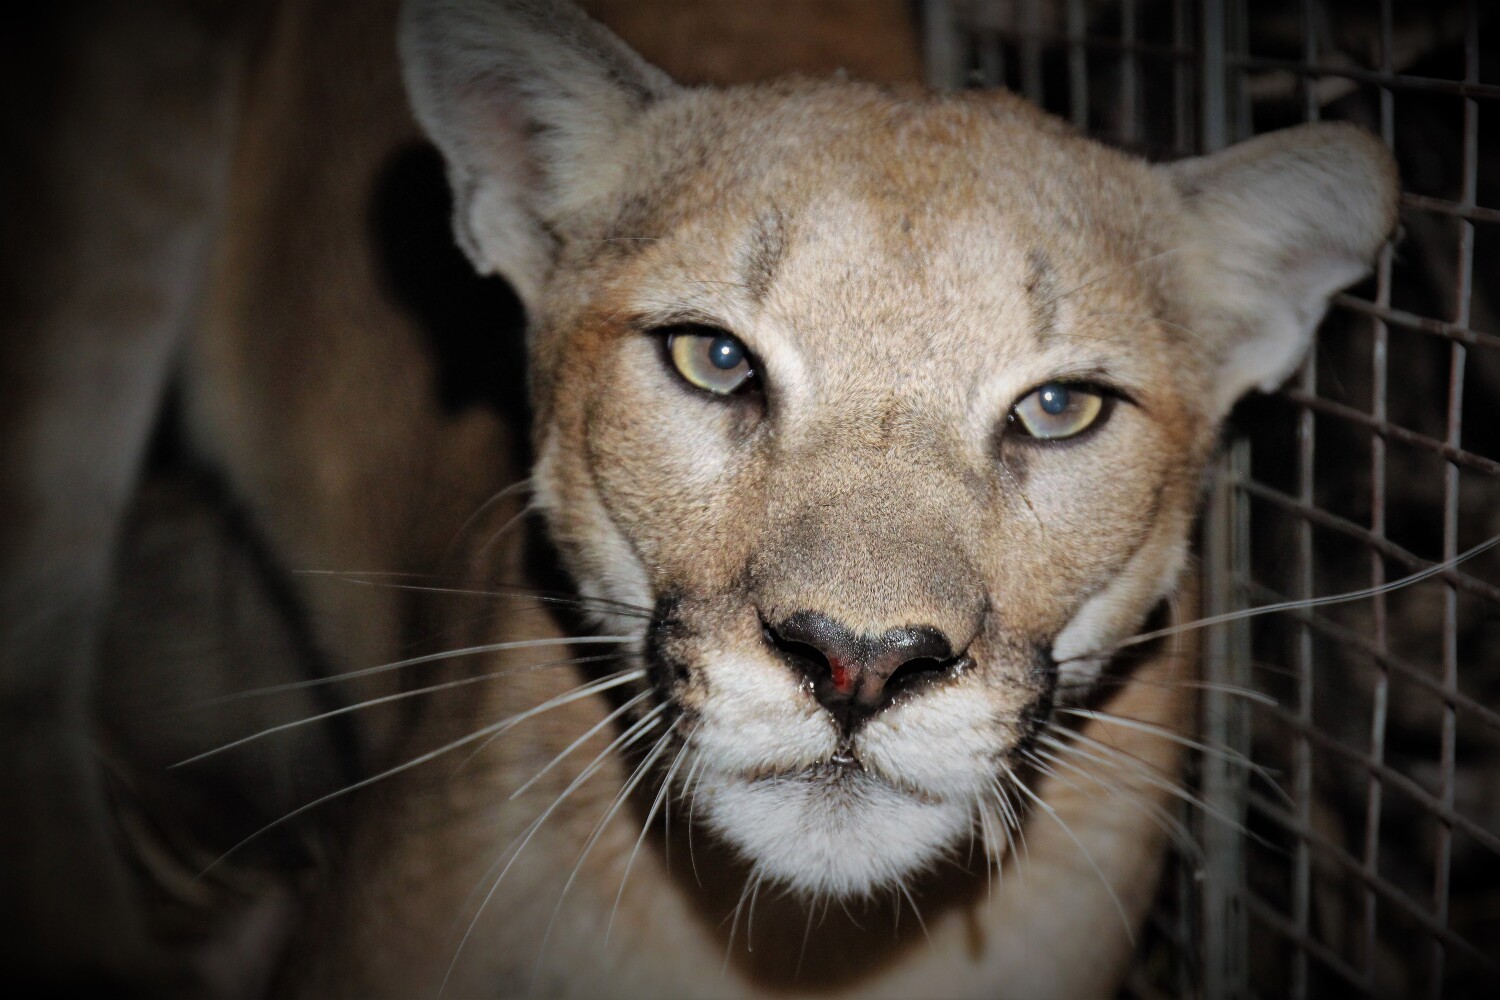 'Stunning': Female mountain lion is 99th to be tracked in Santa Monica Mountains study